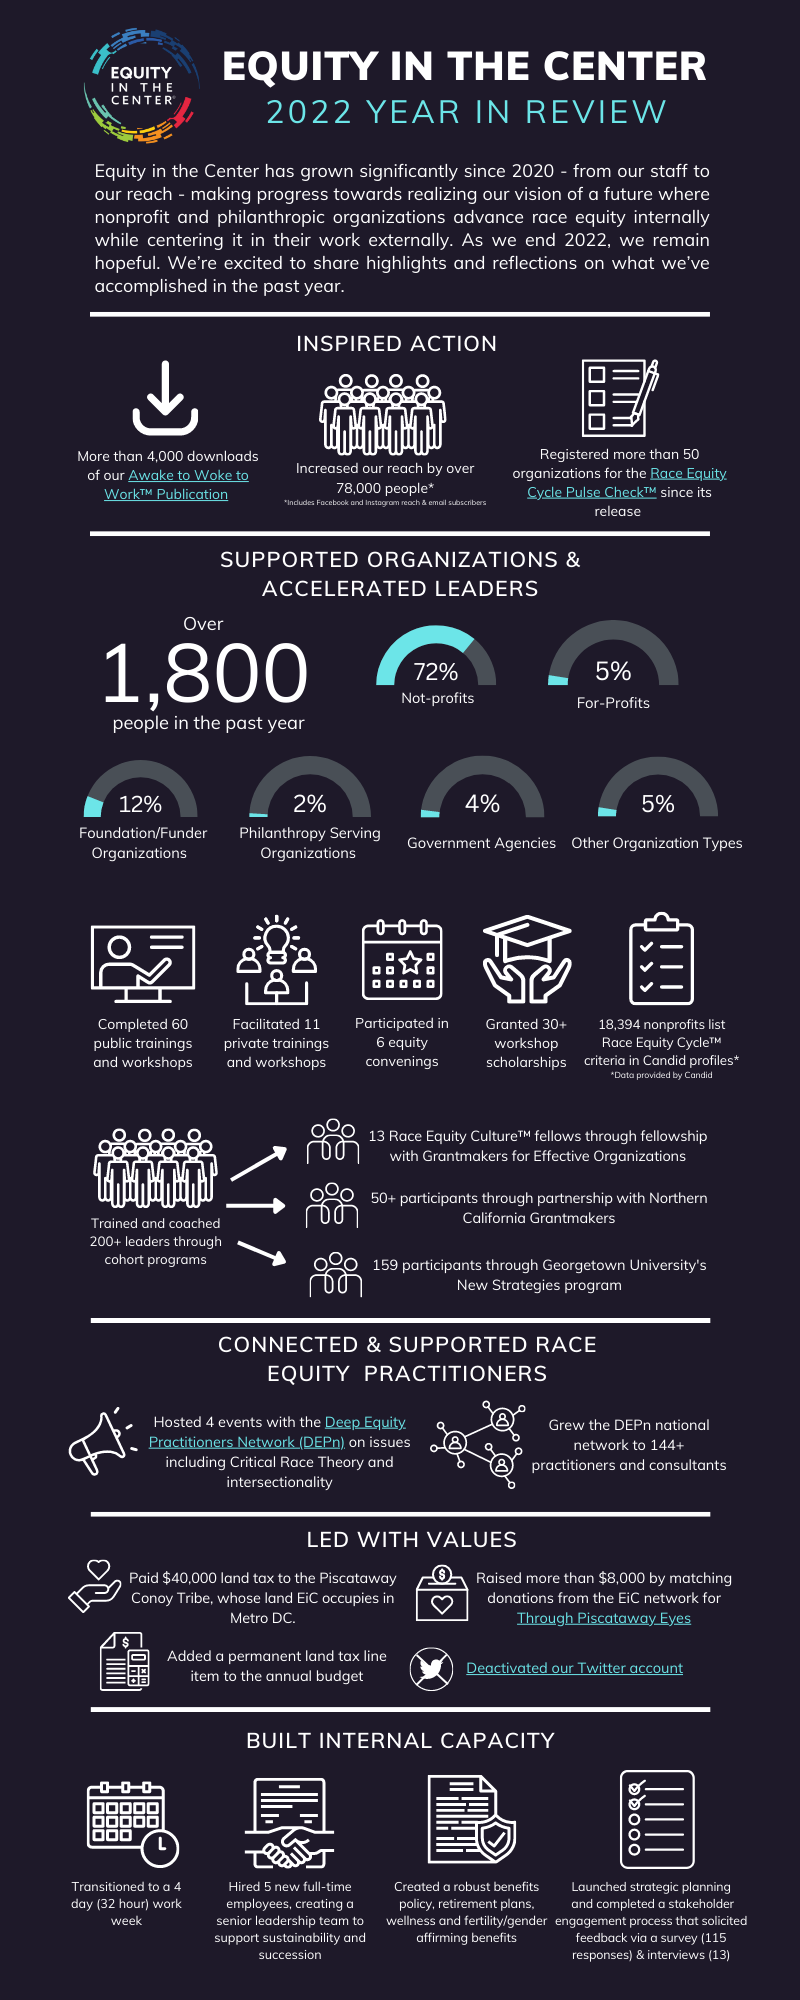 EIC 2022 Year in Review Infographic